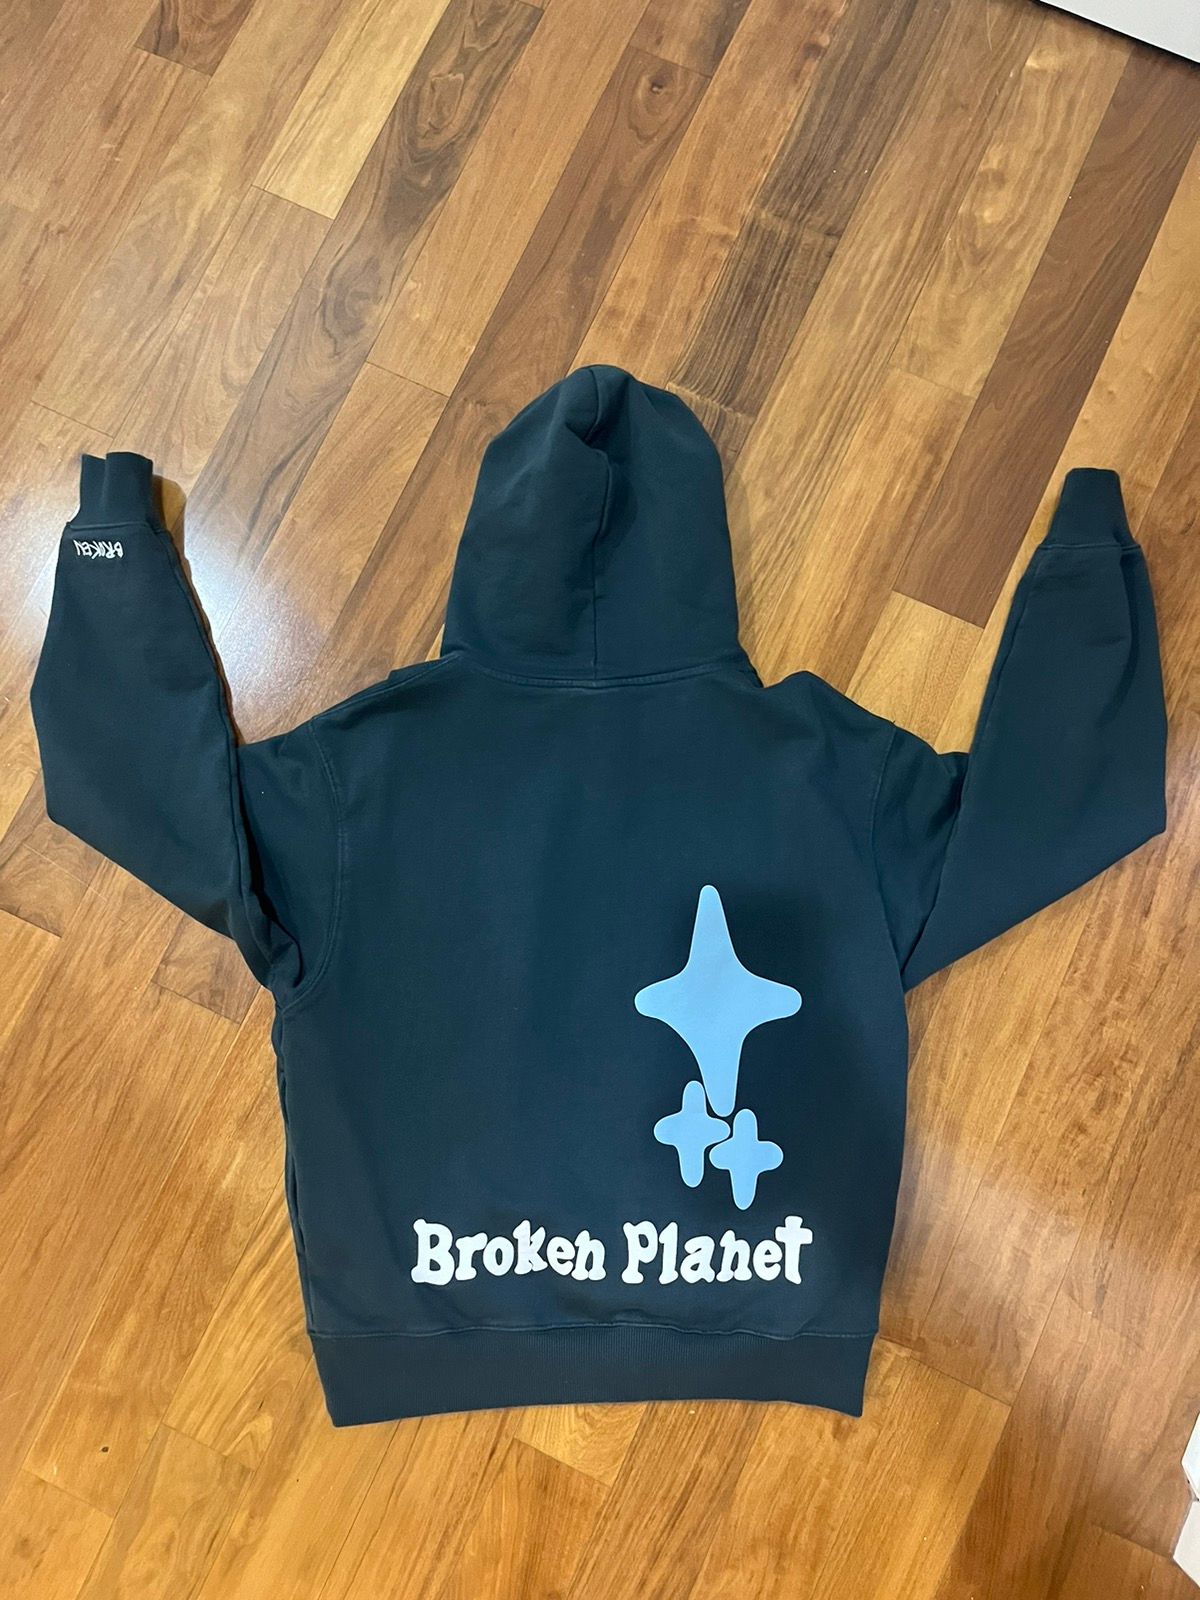 Broken Planet [Small] Broken Planet The Madness Never Ends Hoodie Size US S / EU 44-46 / 1 - 3 Thumbnail